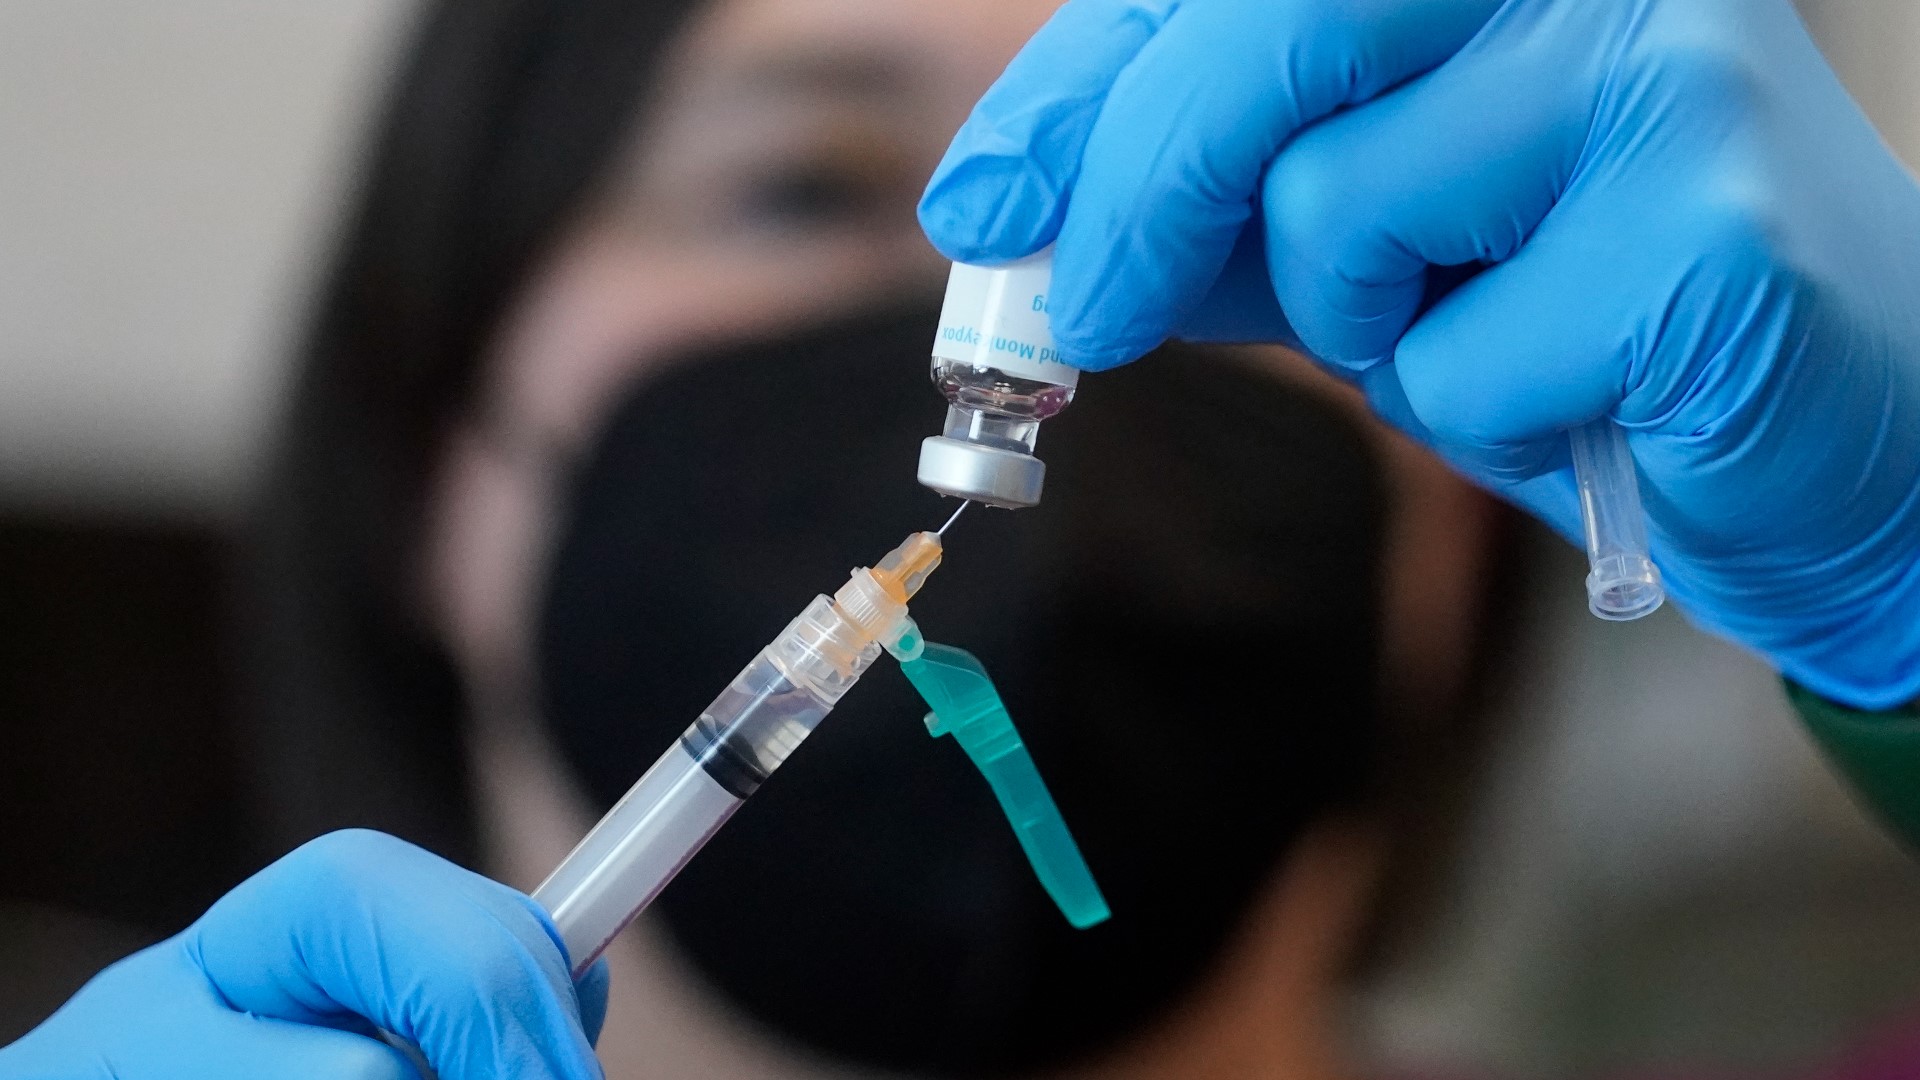 The unusual step is an acknowledgment that the U.S. currently lacks the supplies needed to vaccinate everyone seeking protection from the rapidly spreading virus.